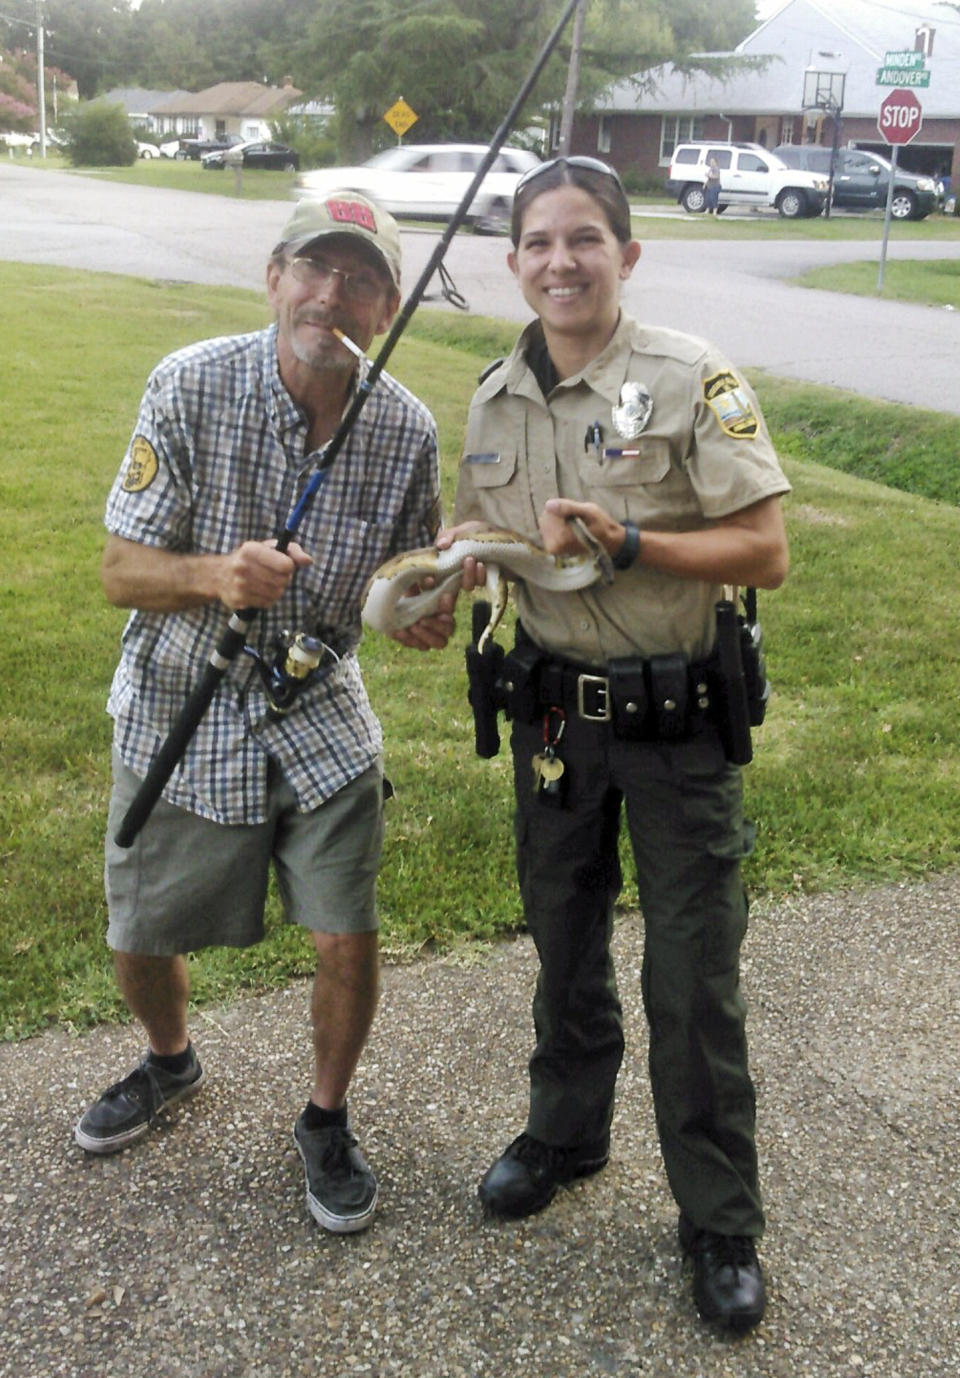 Kenny Spruill and and unidentified officer pose with a snake after he removed it from the toilet. Source: AAP